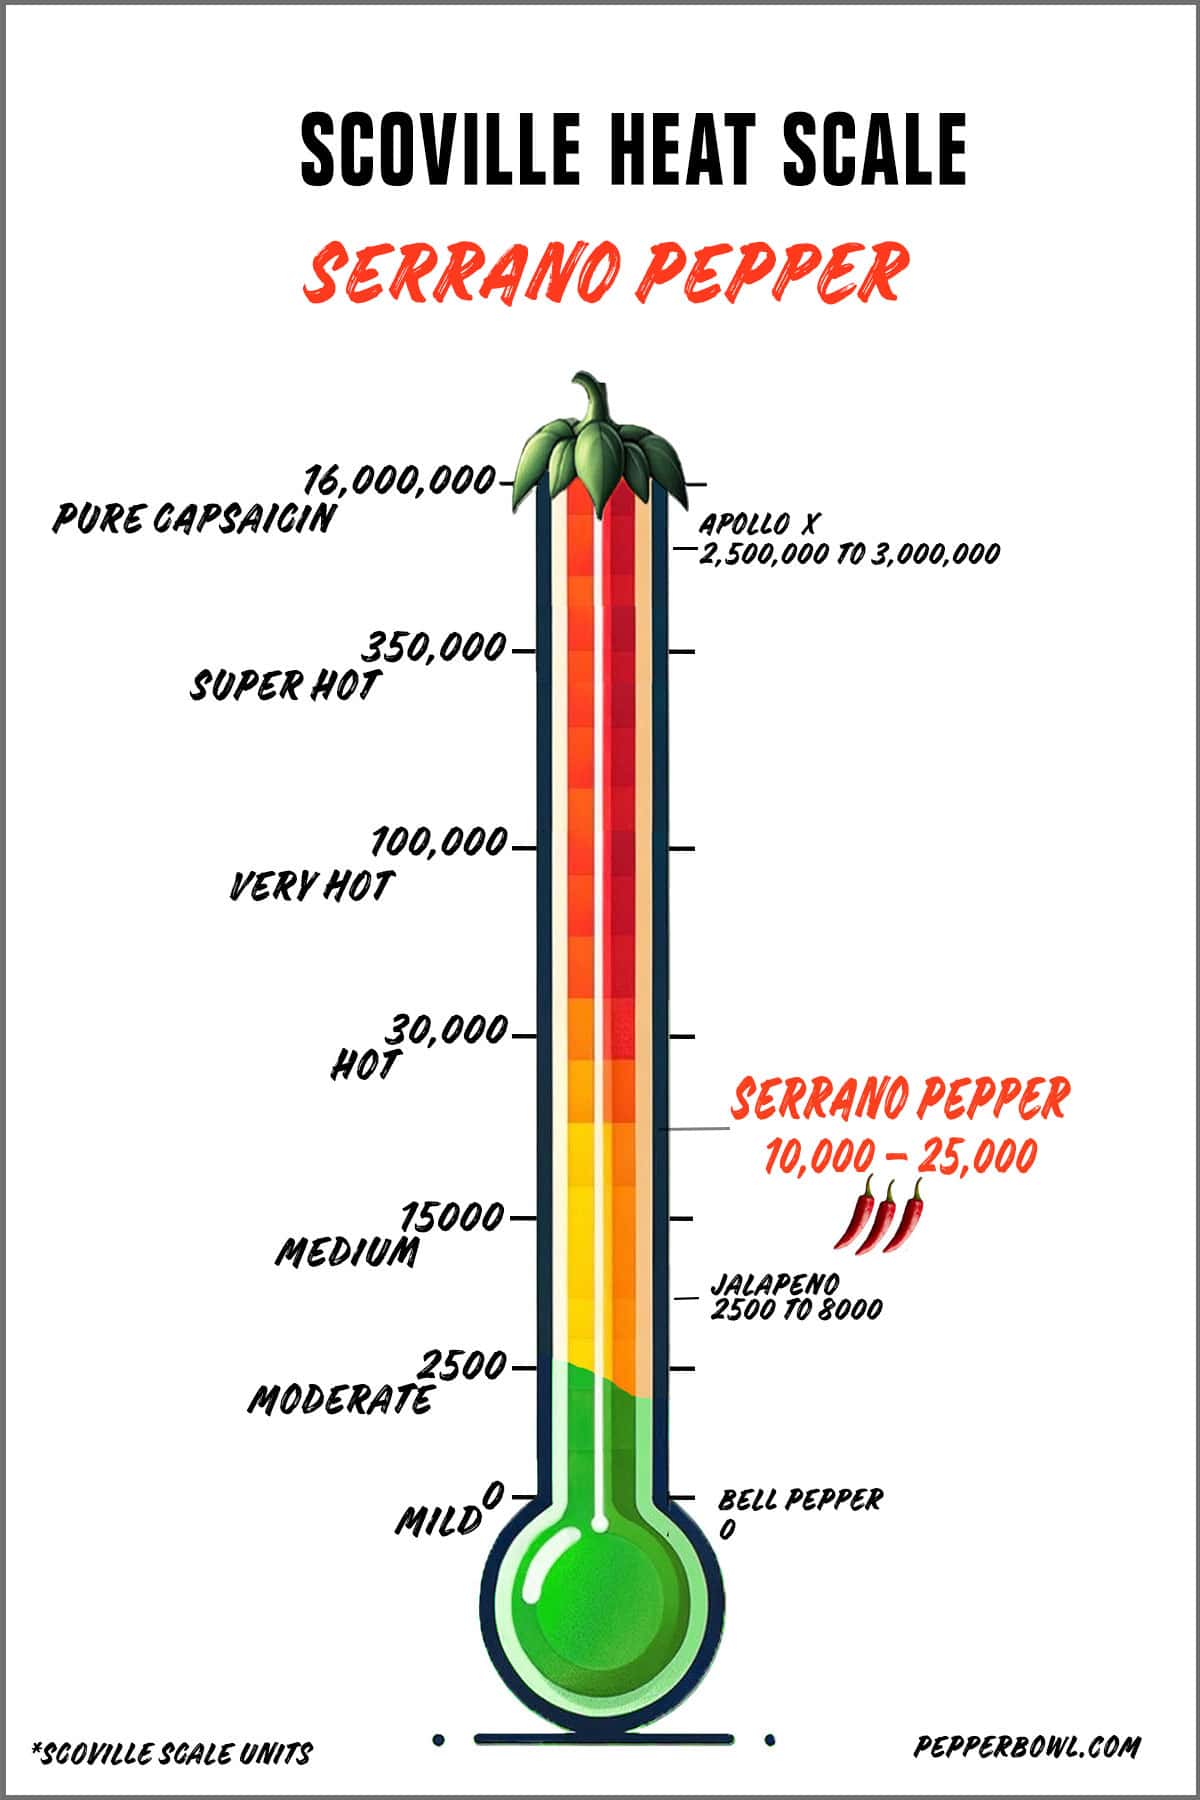 Illustration of the serrano pepper in the Scoville scale, representing its hot heat intensity.